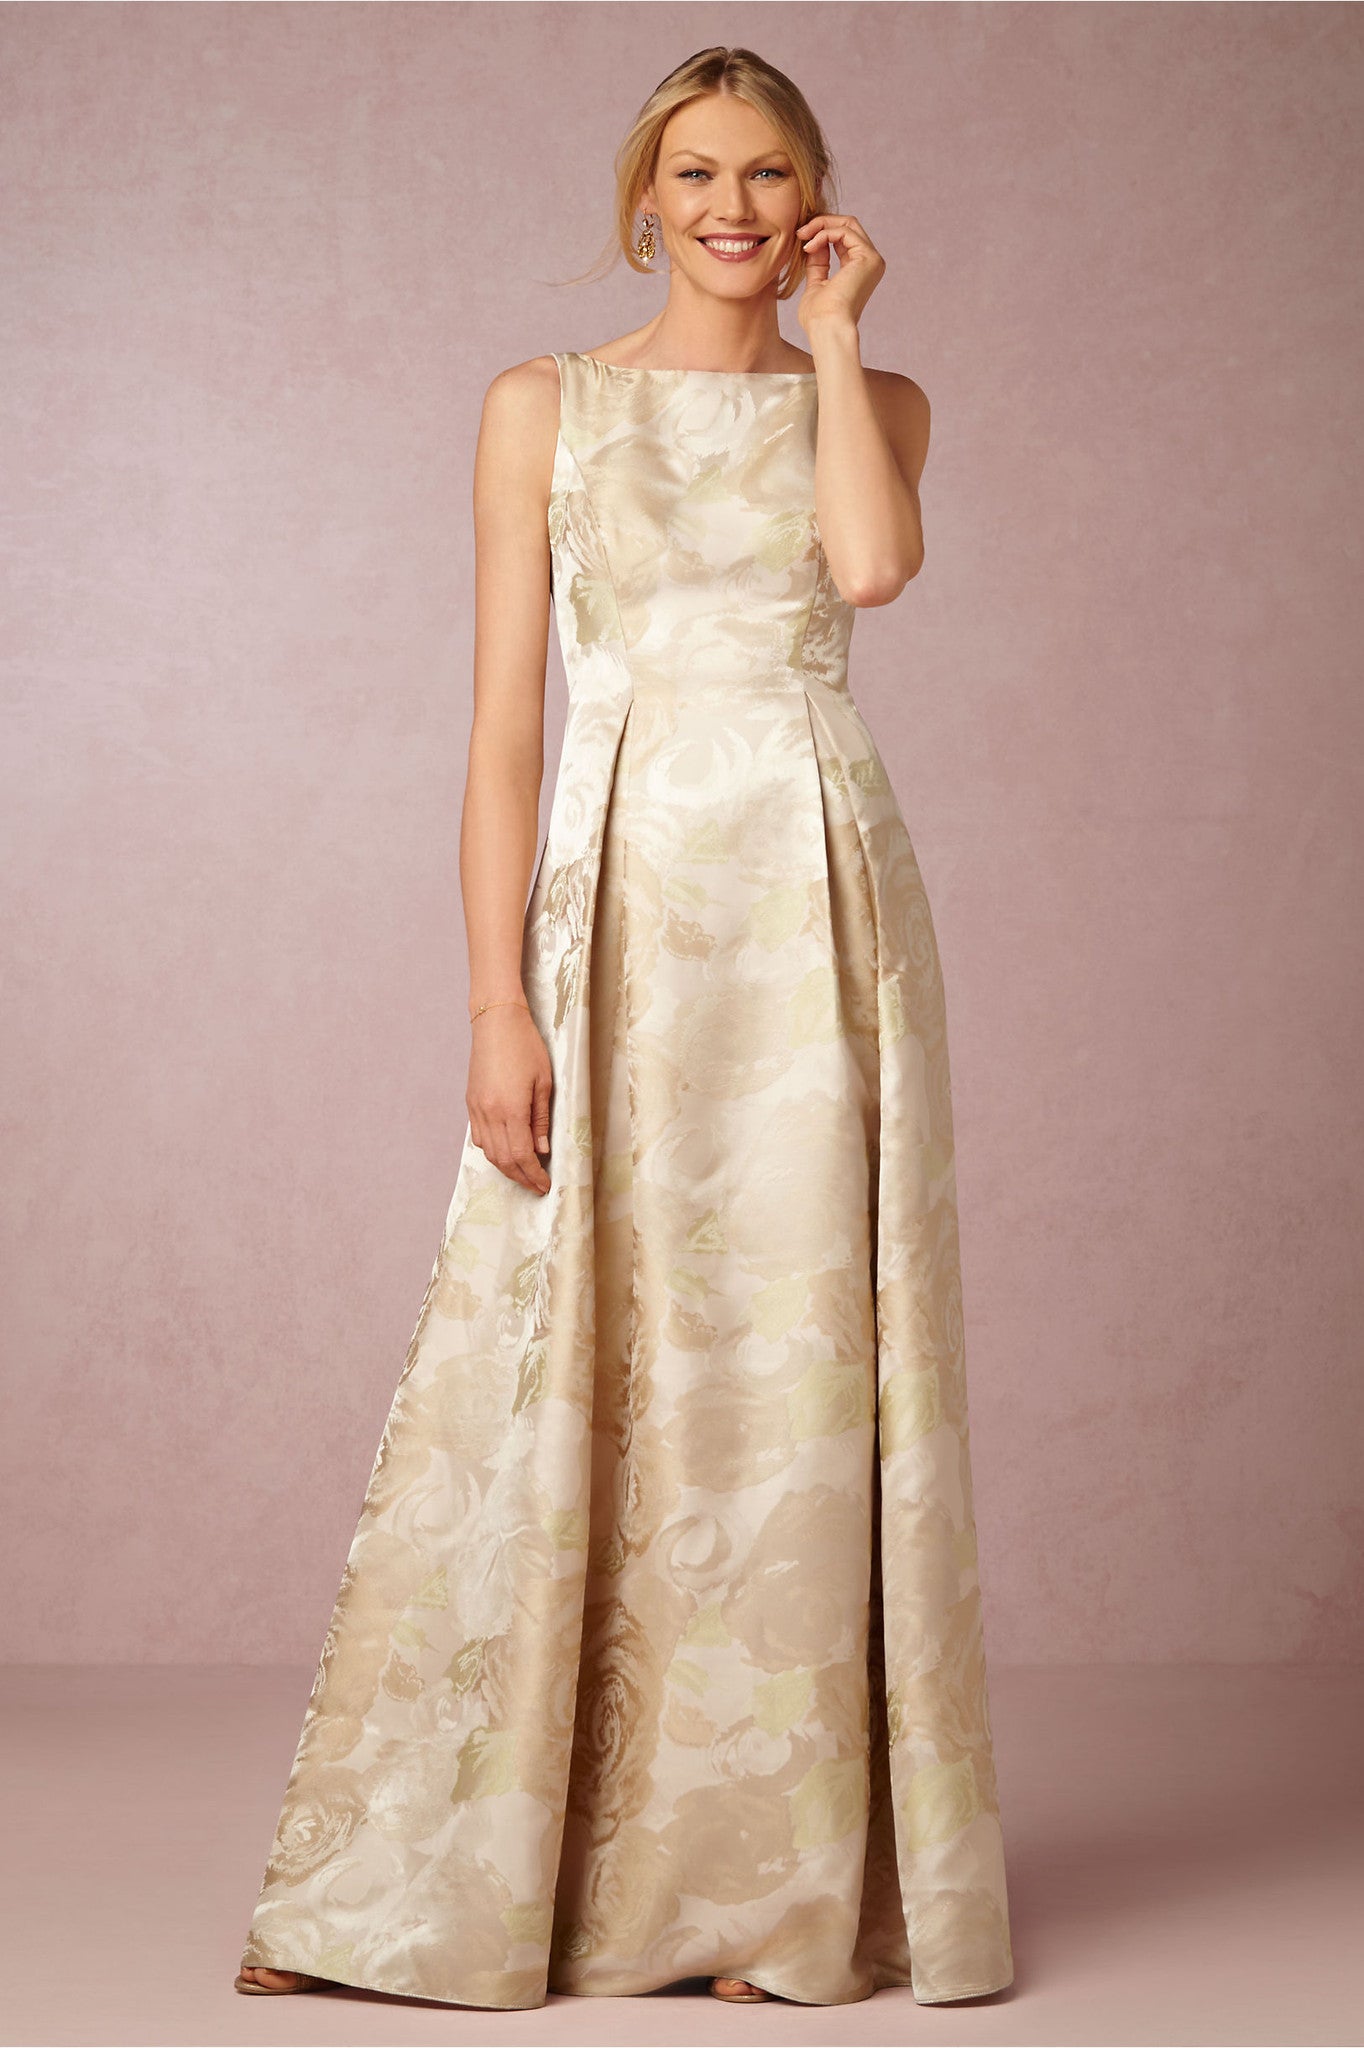 adrianna papell floral jacquard ball gown